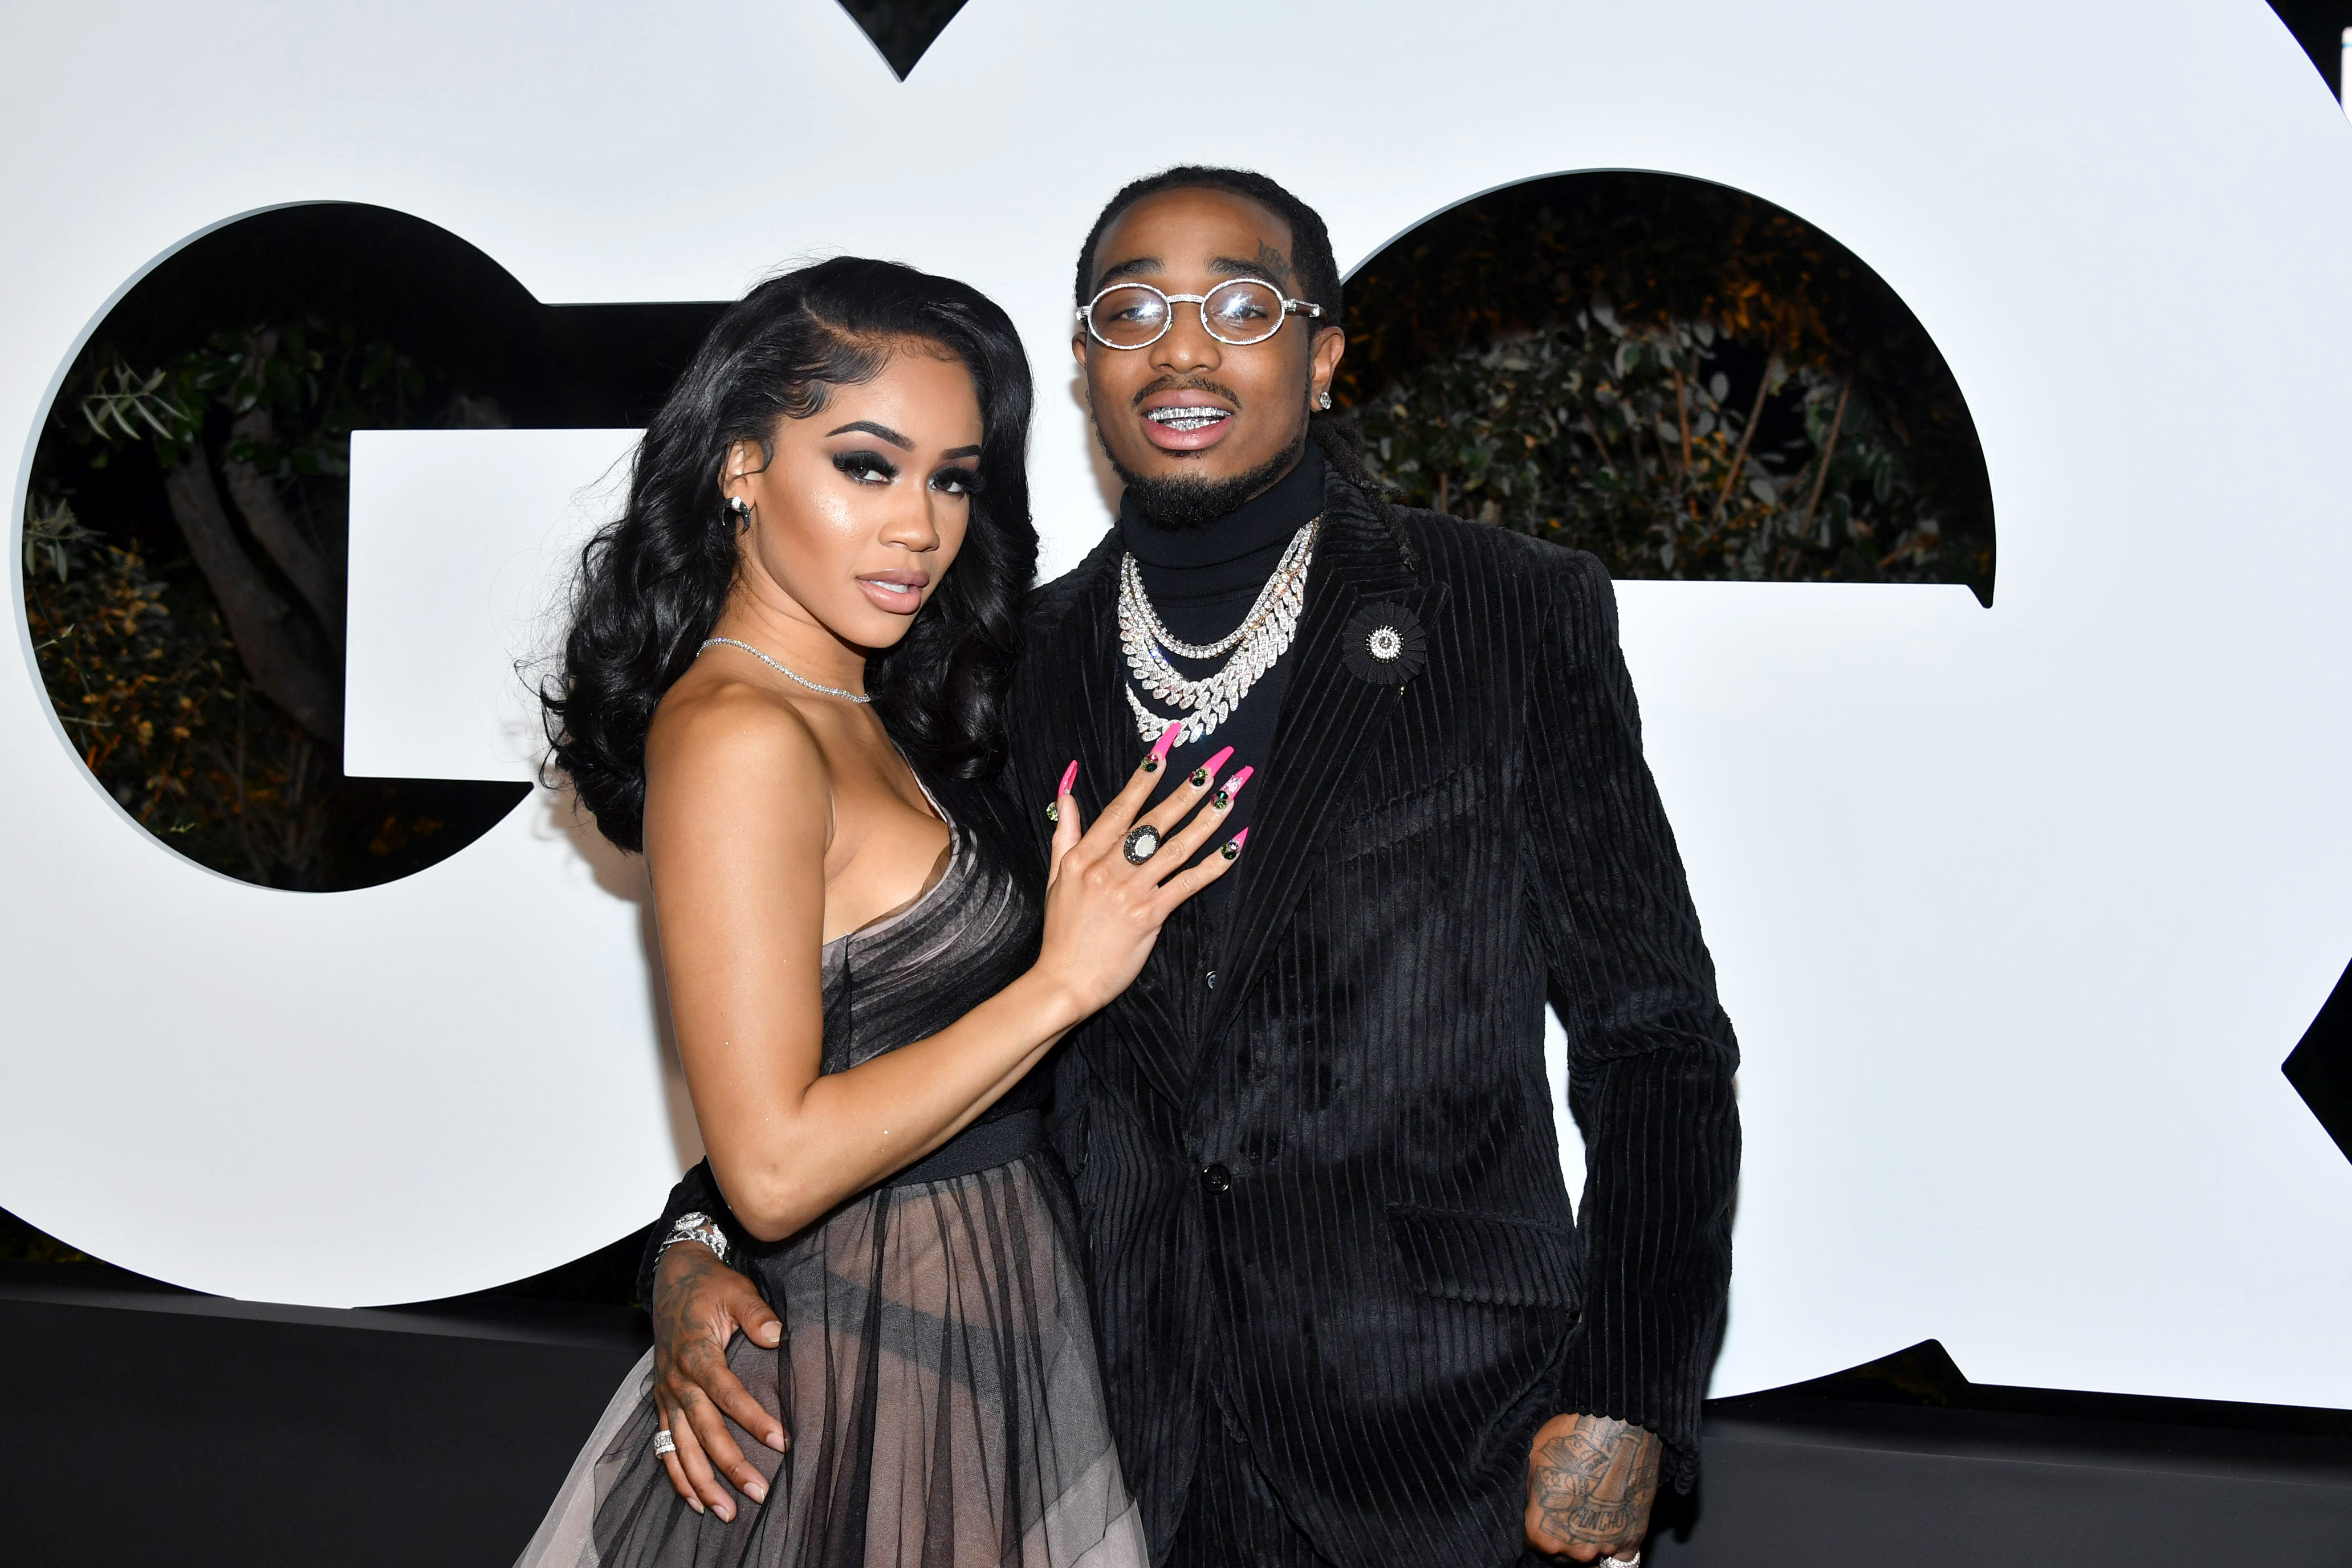 Saweetie and Quavo attend the 2019 GQ Men of the Year at The West Hollywood Edition, on December 5, 2019, in West Hollywood, California. | Source: Getty Images